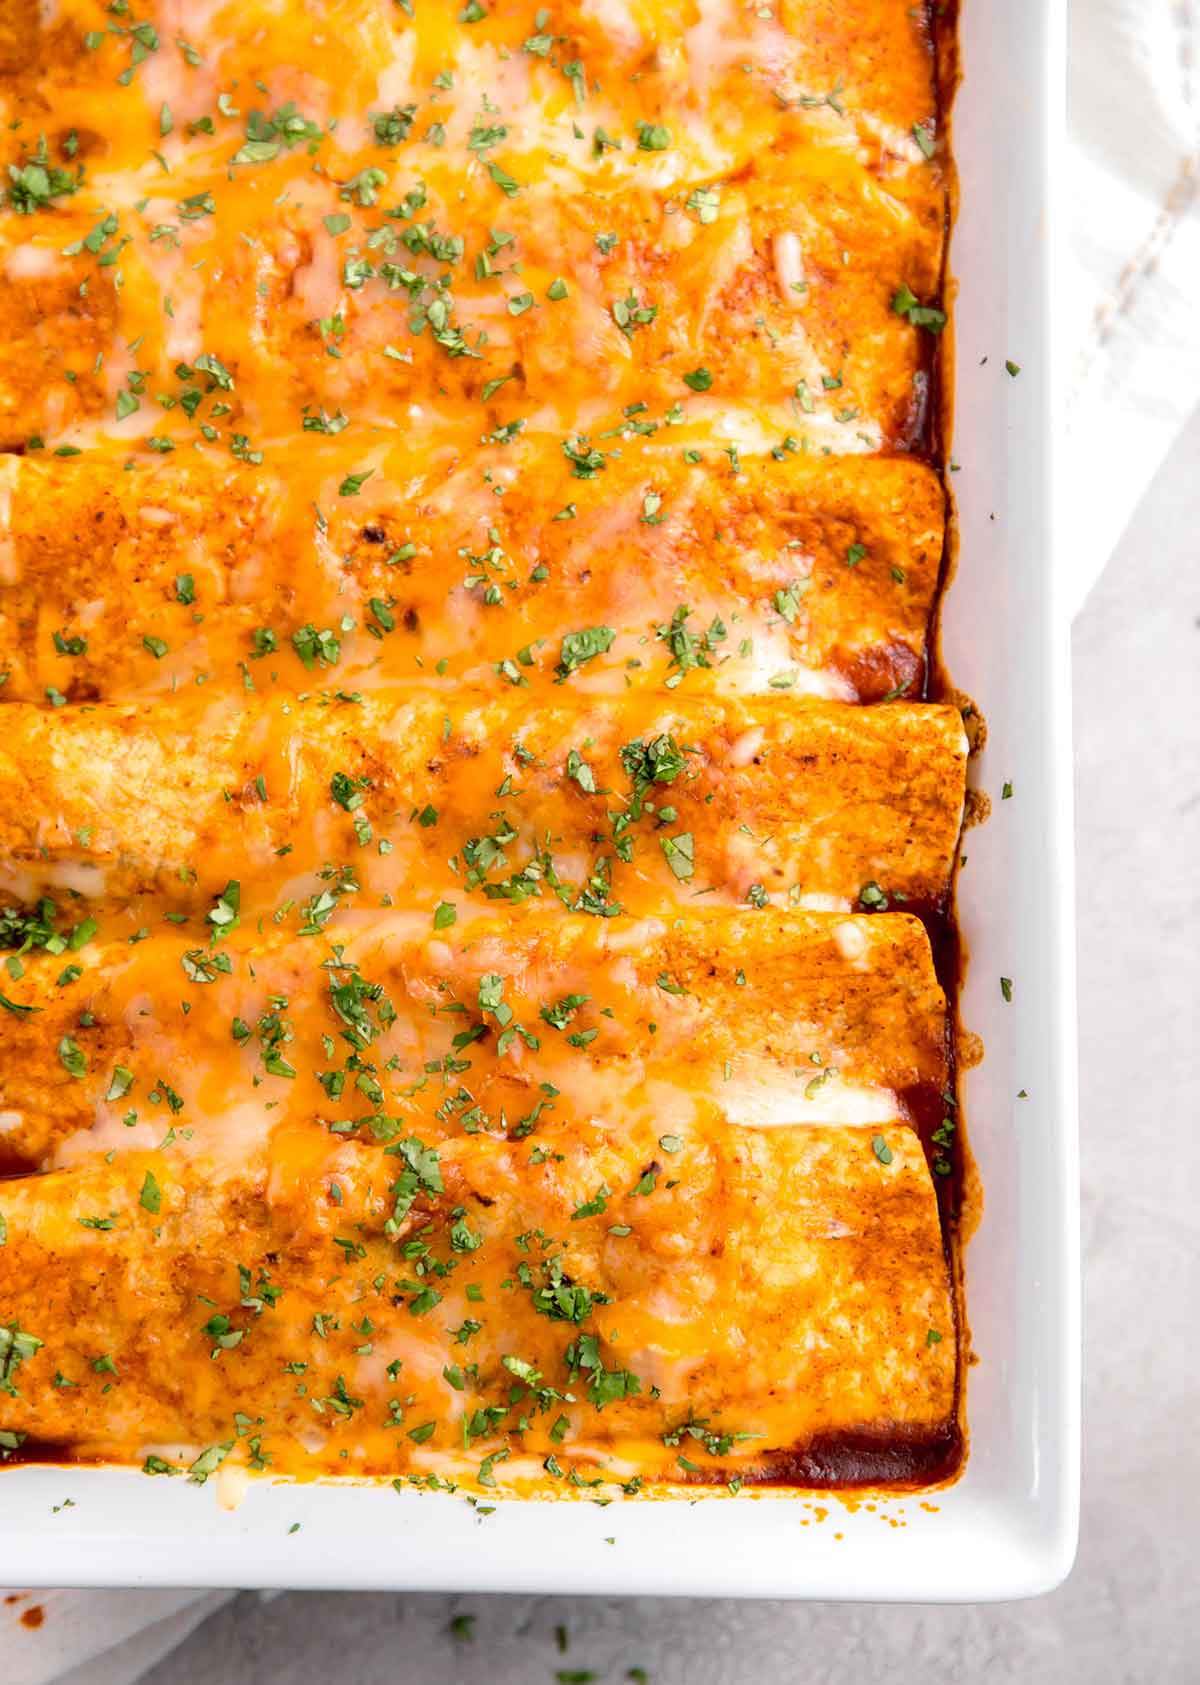 Overhead close up photo of baked enchiladas still in baking dish.